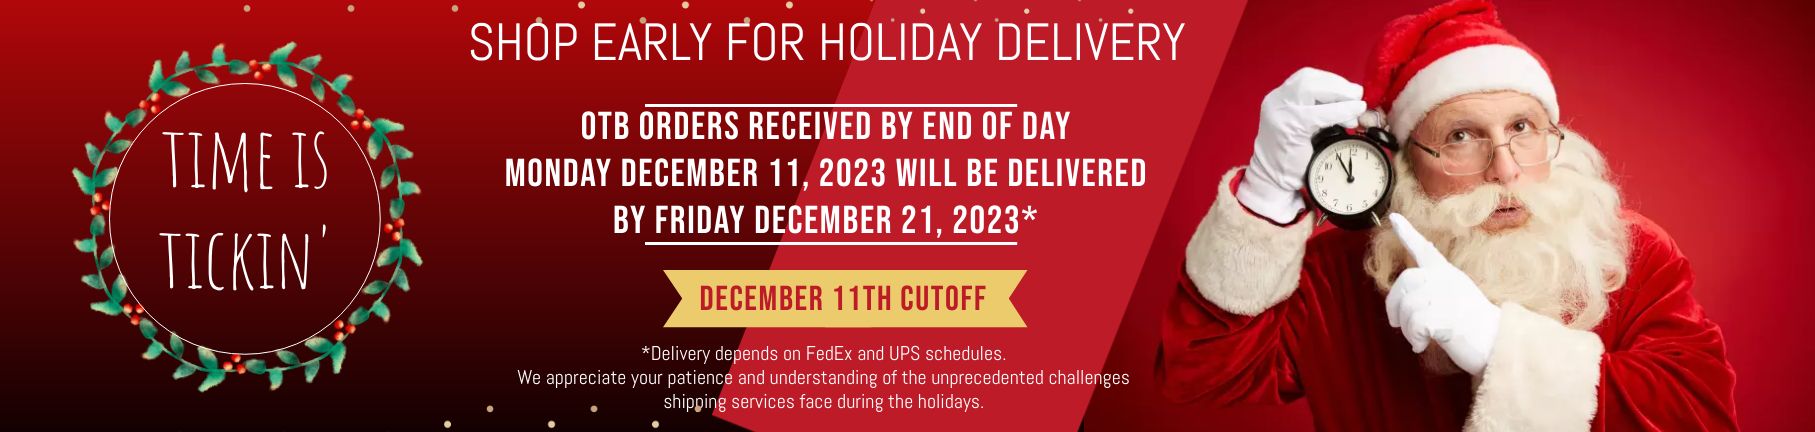 OTB Order Cutoff 12/11/23 For Delivery By 12/21/23